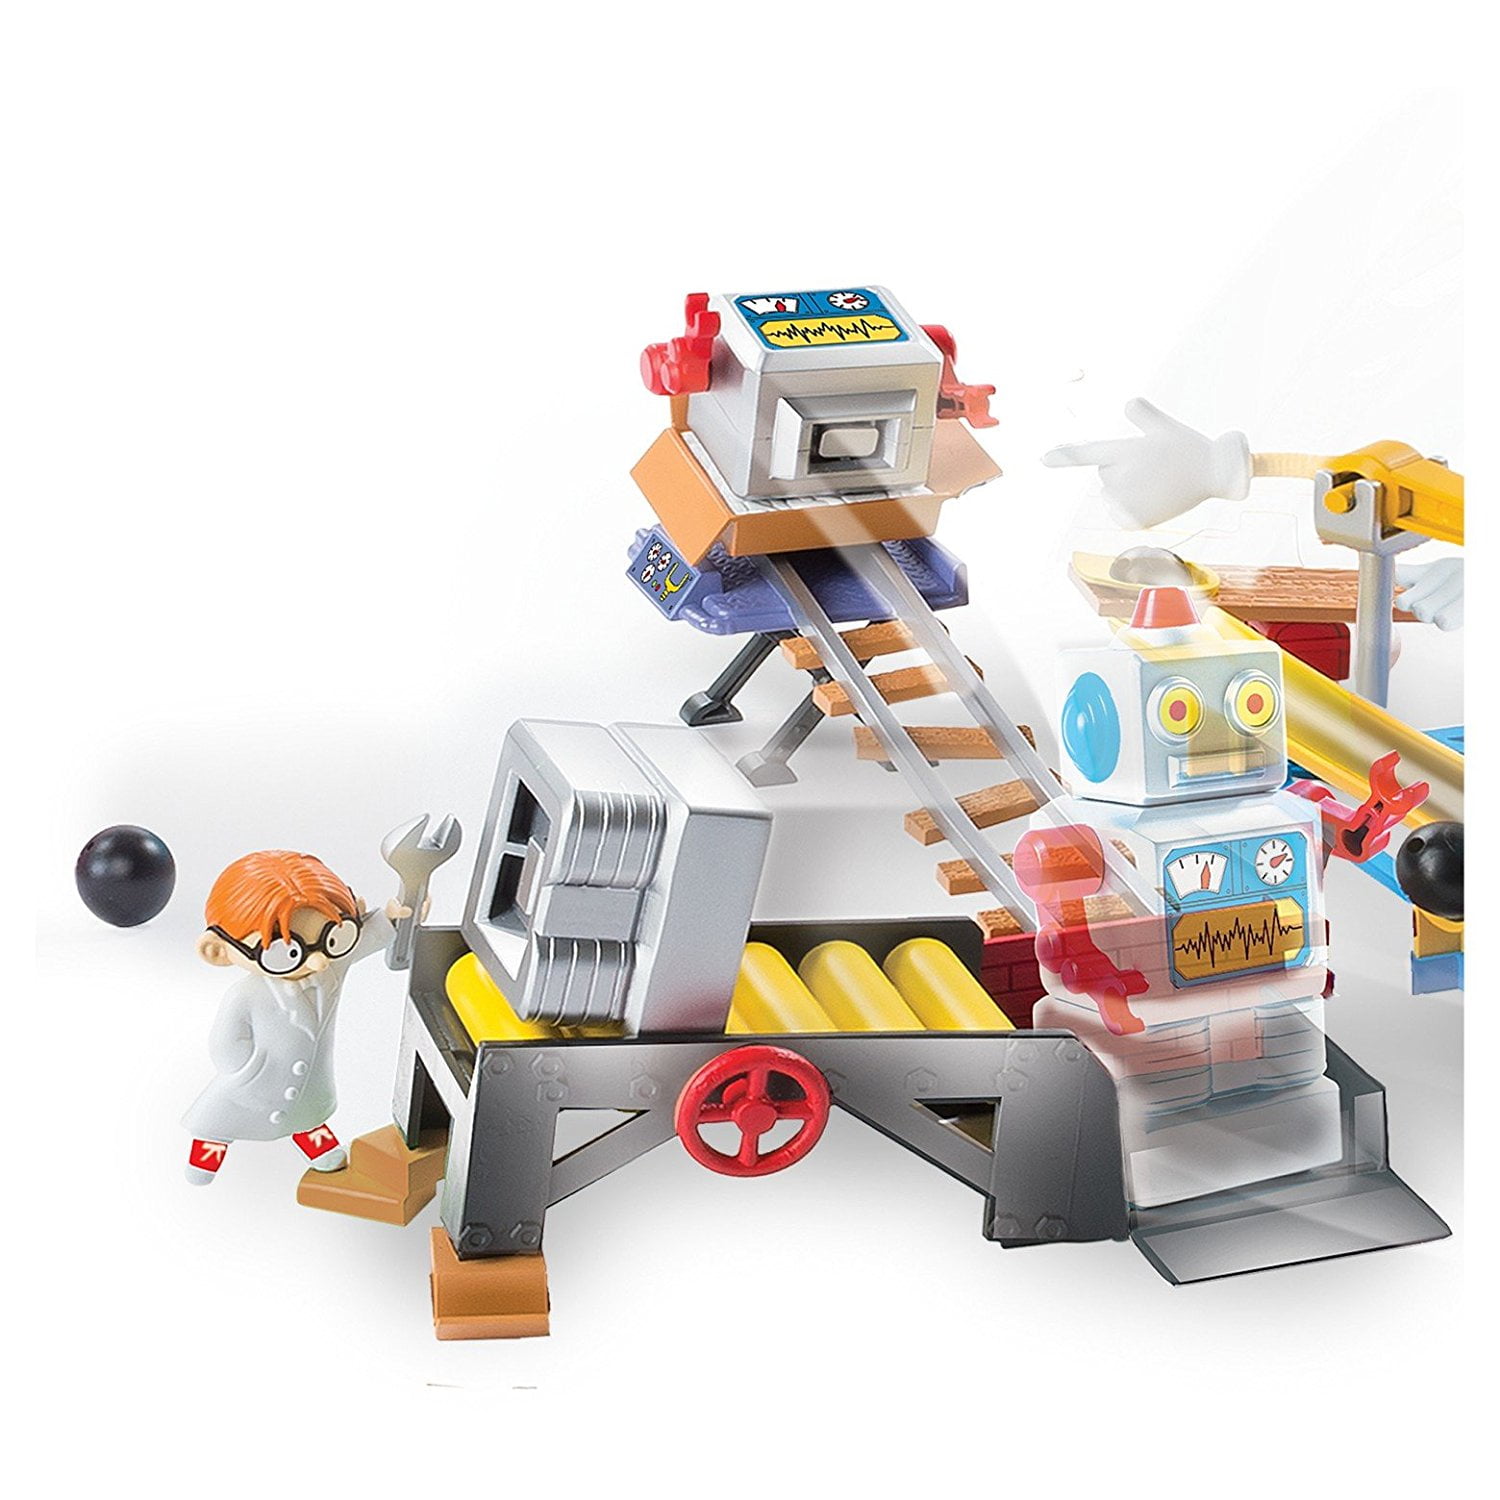 The Robot Factory Challenge Interactive S.T.E.M Learning Kit Rube Goldberg 